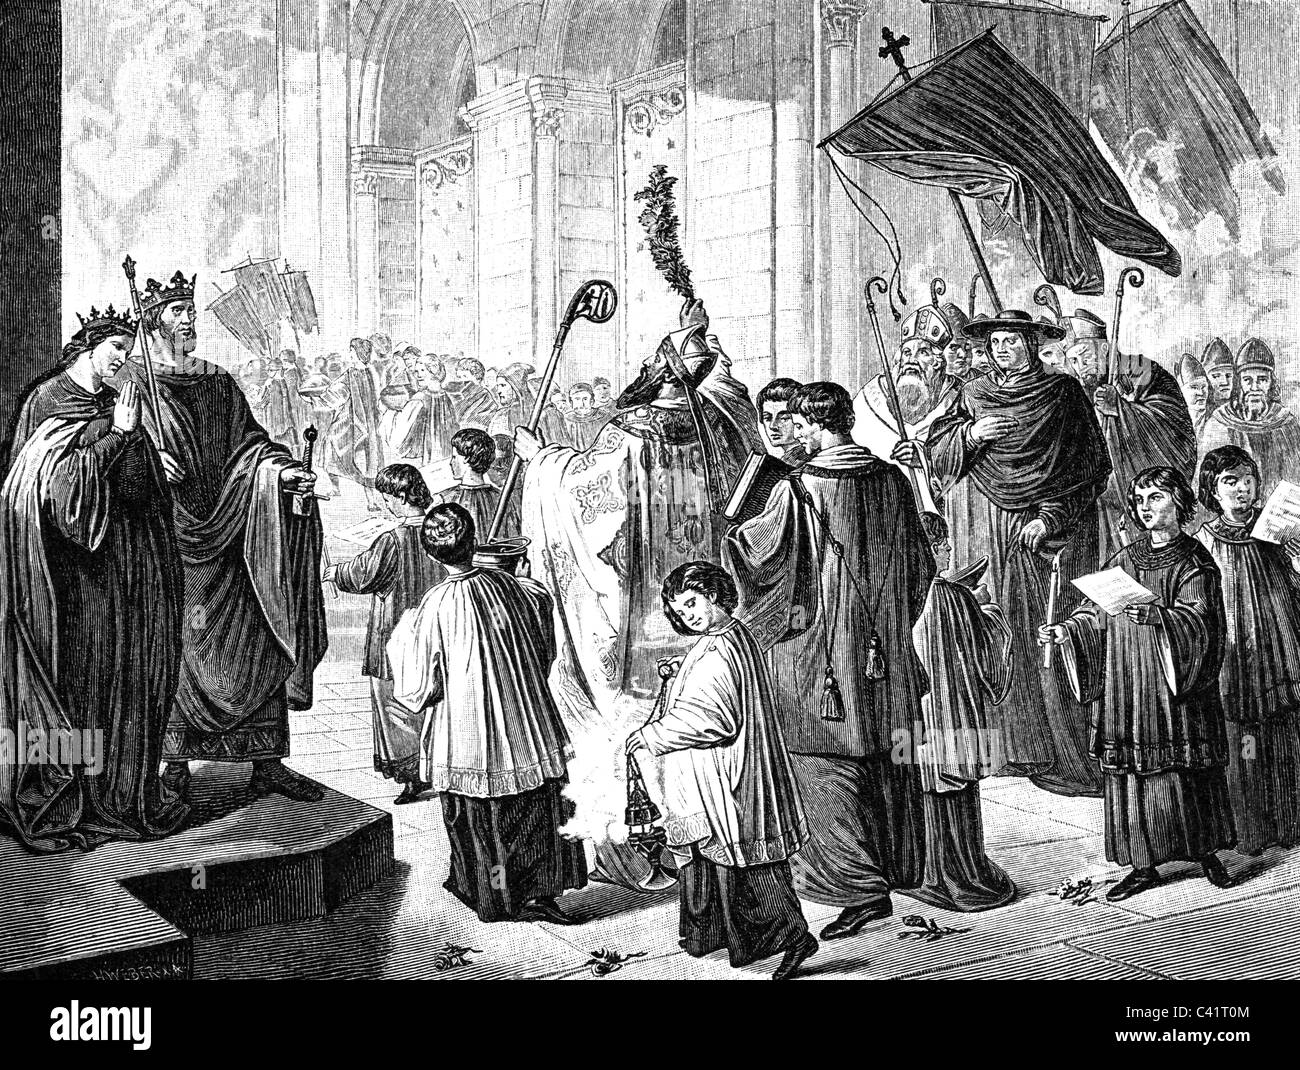 Henry II 'the Saint', 6.5.973 - 13.7.1024, Holy Roman Emperor 14.2.1014 - 13.7.1024, with wife Cunigunde, consegration of the Bamberg Cathedral, 1007,  wood engraving, 19th century, , Stock Photo